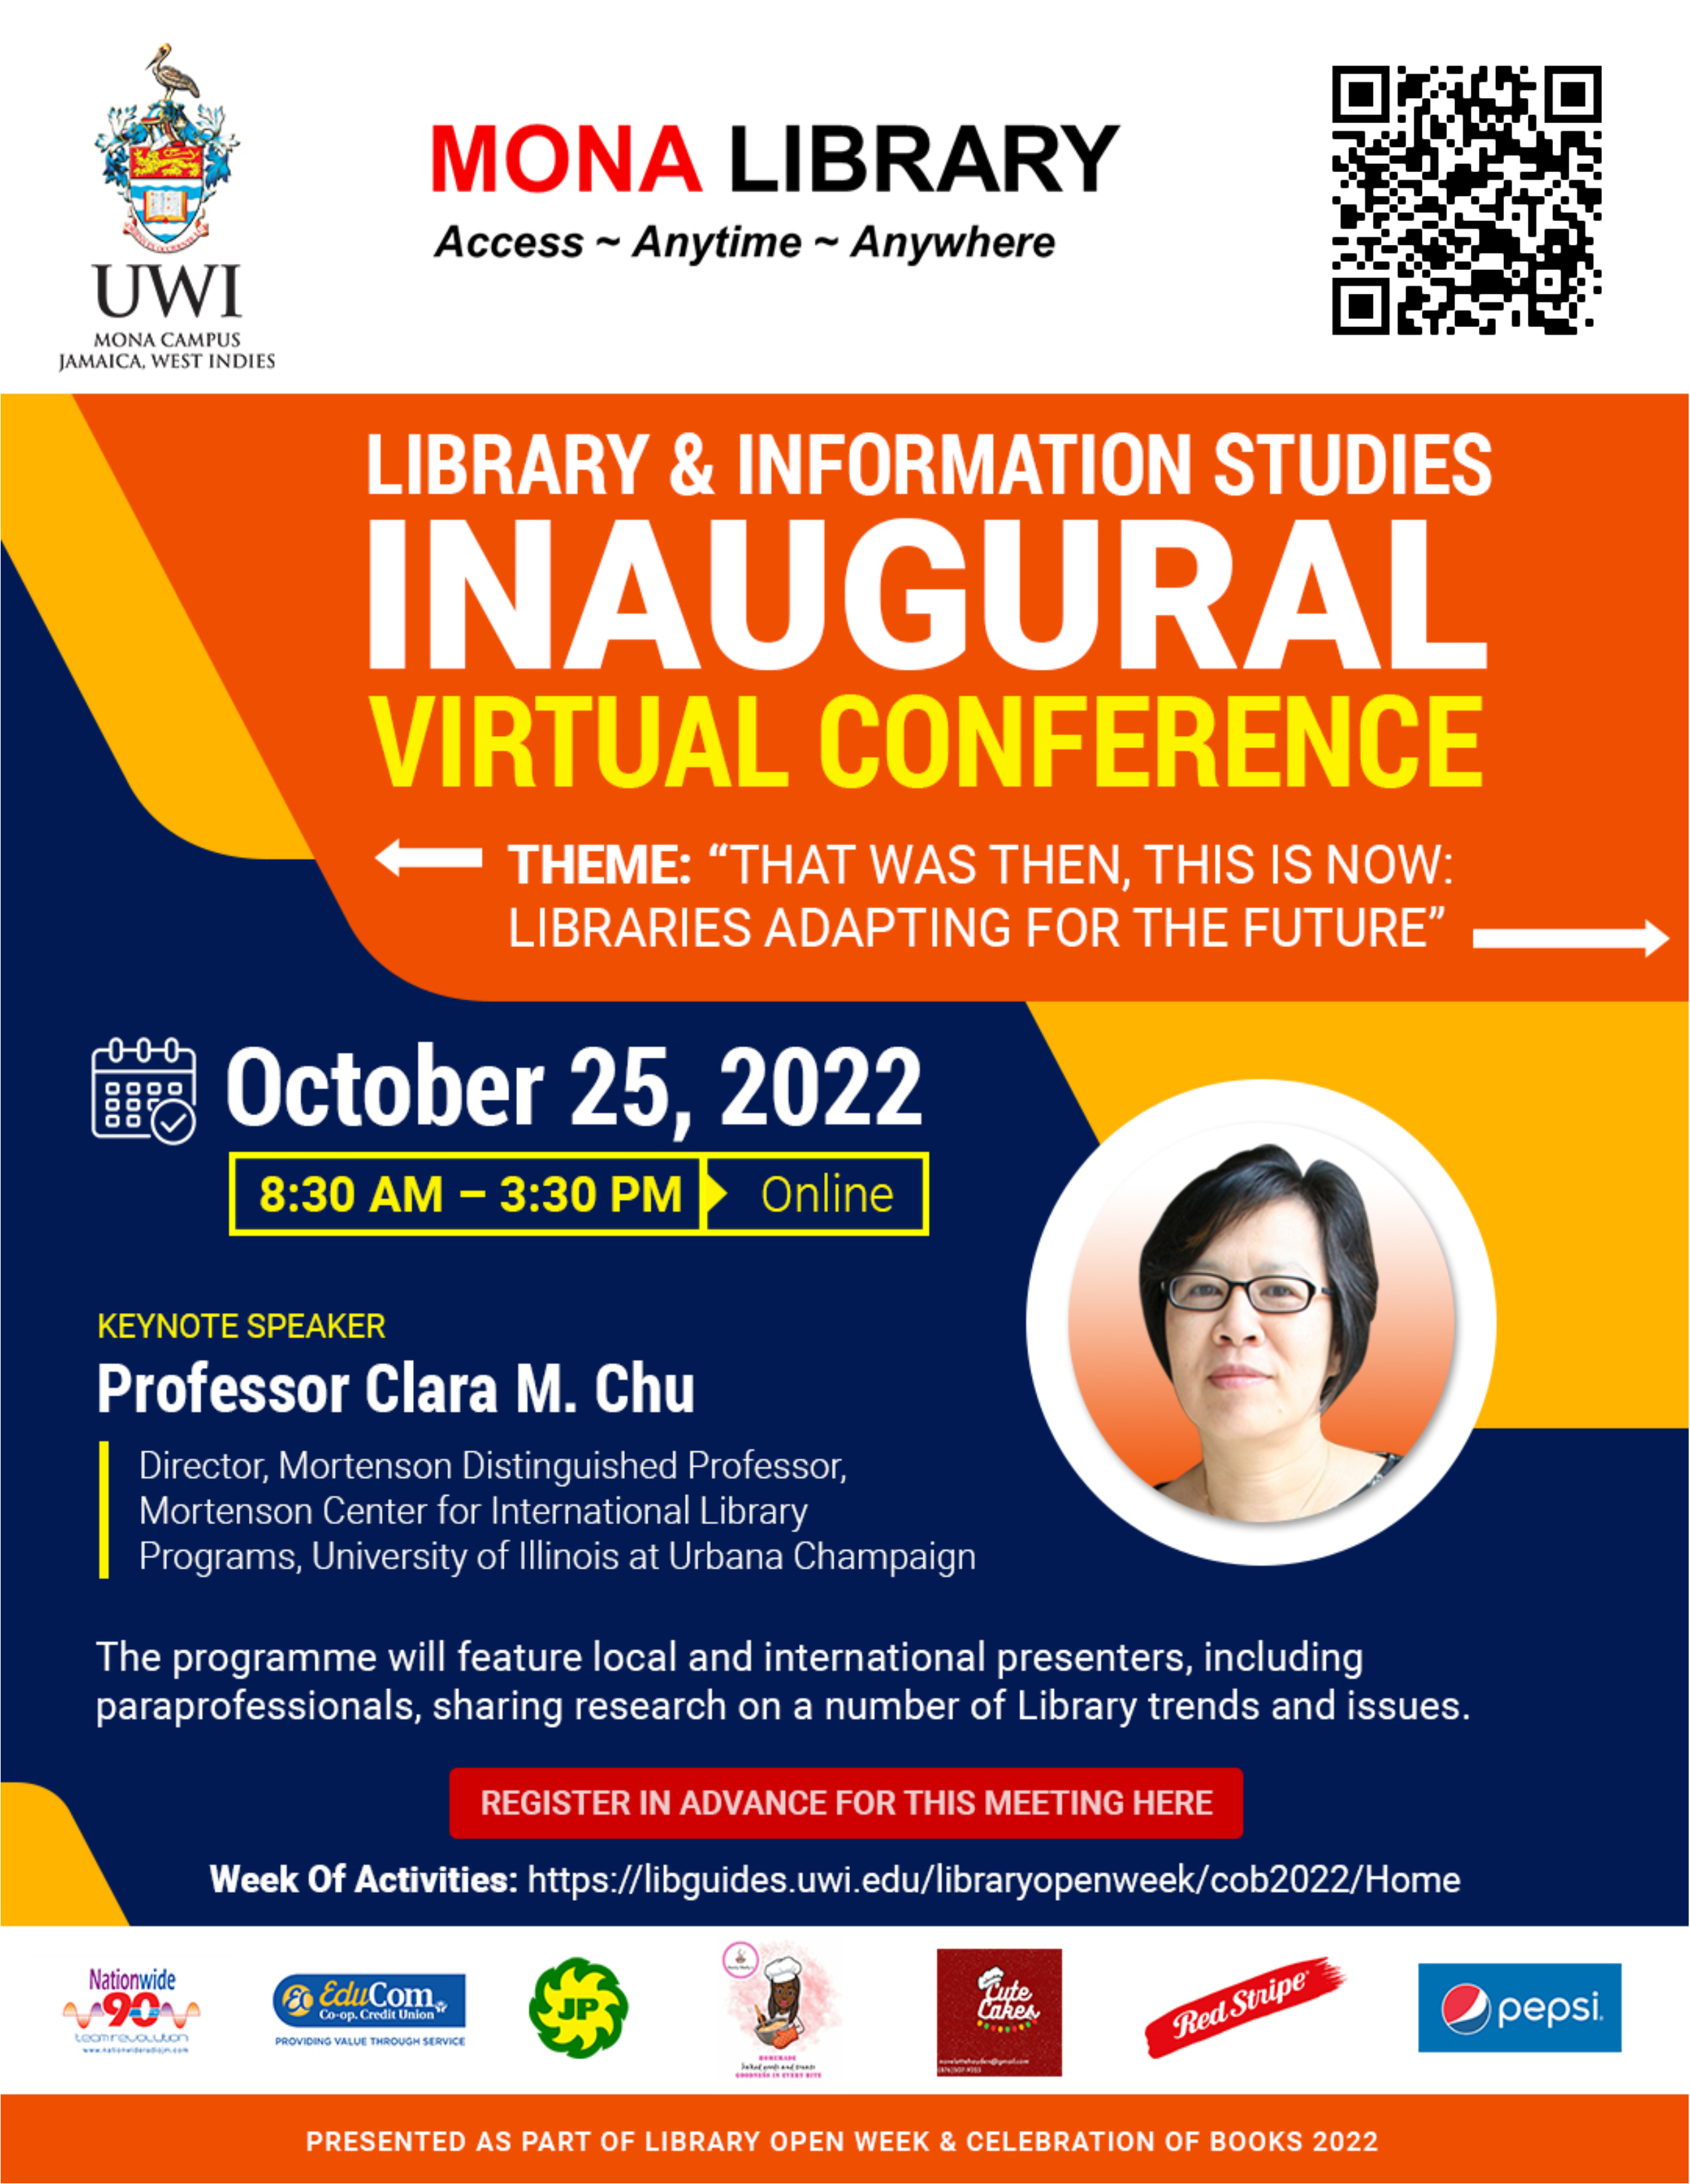 Library Open Week 2022 | Library & Information Studies: Inaugural Virtual Conference